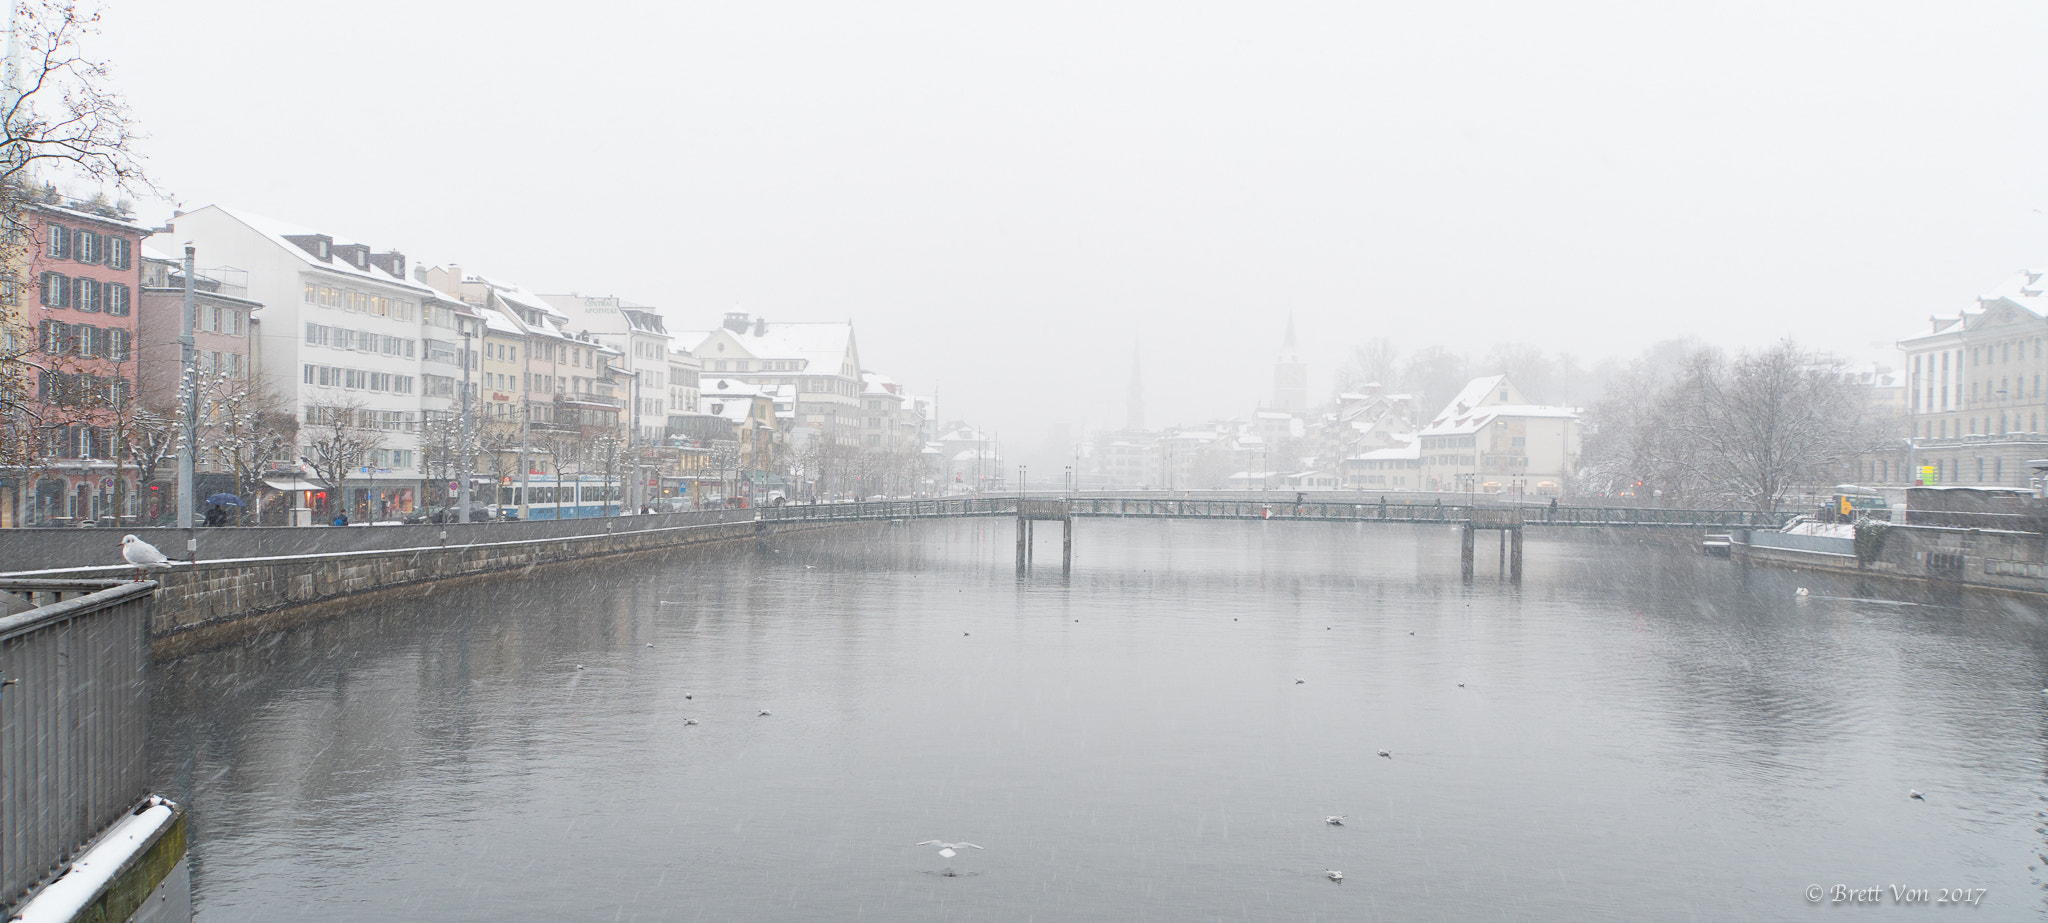 Sony a6300 sample photo. Zurich switzerland in the snow. photography